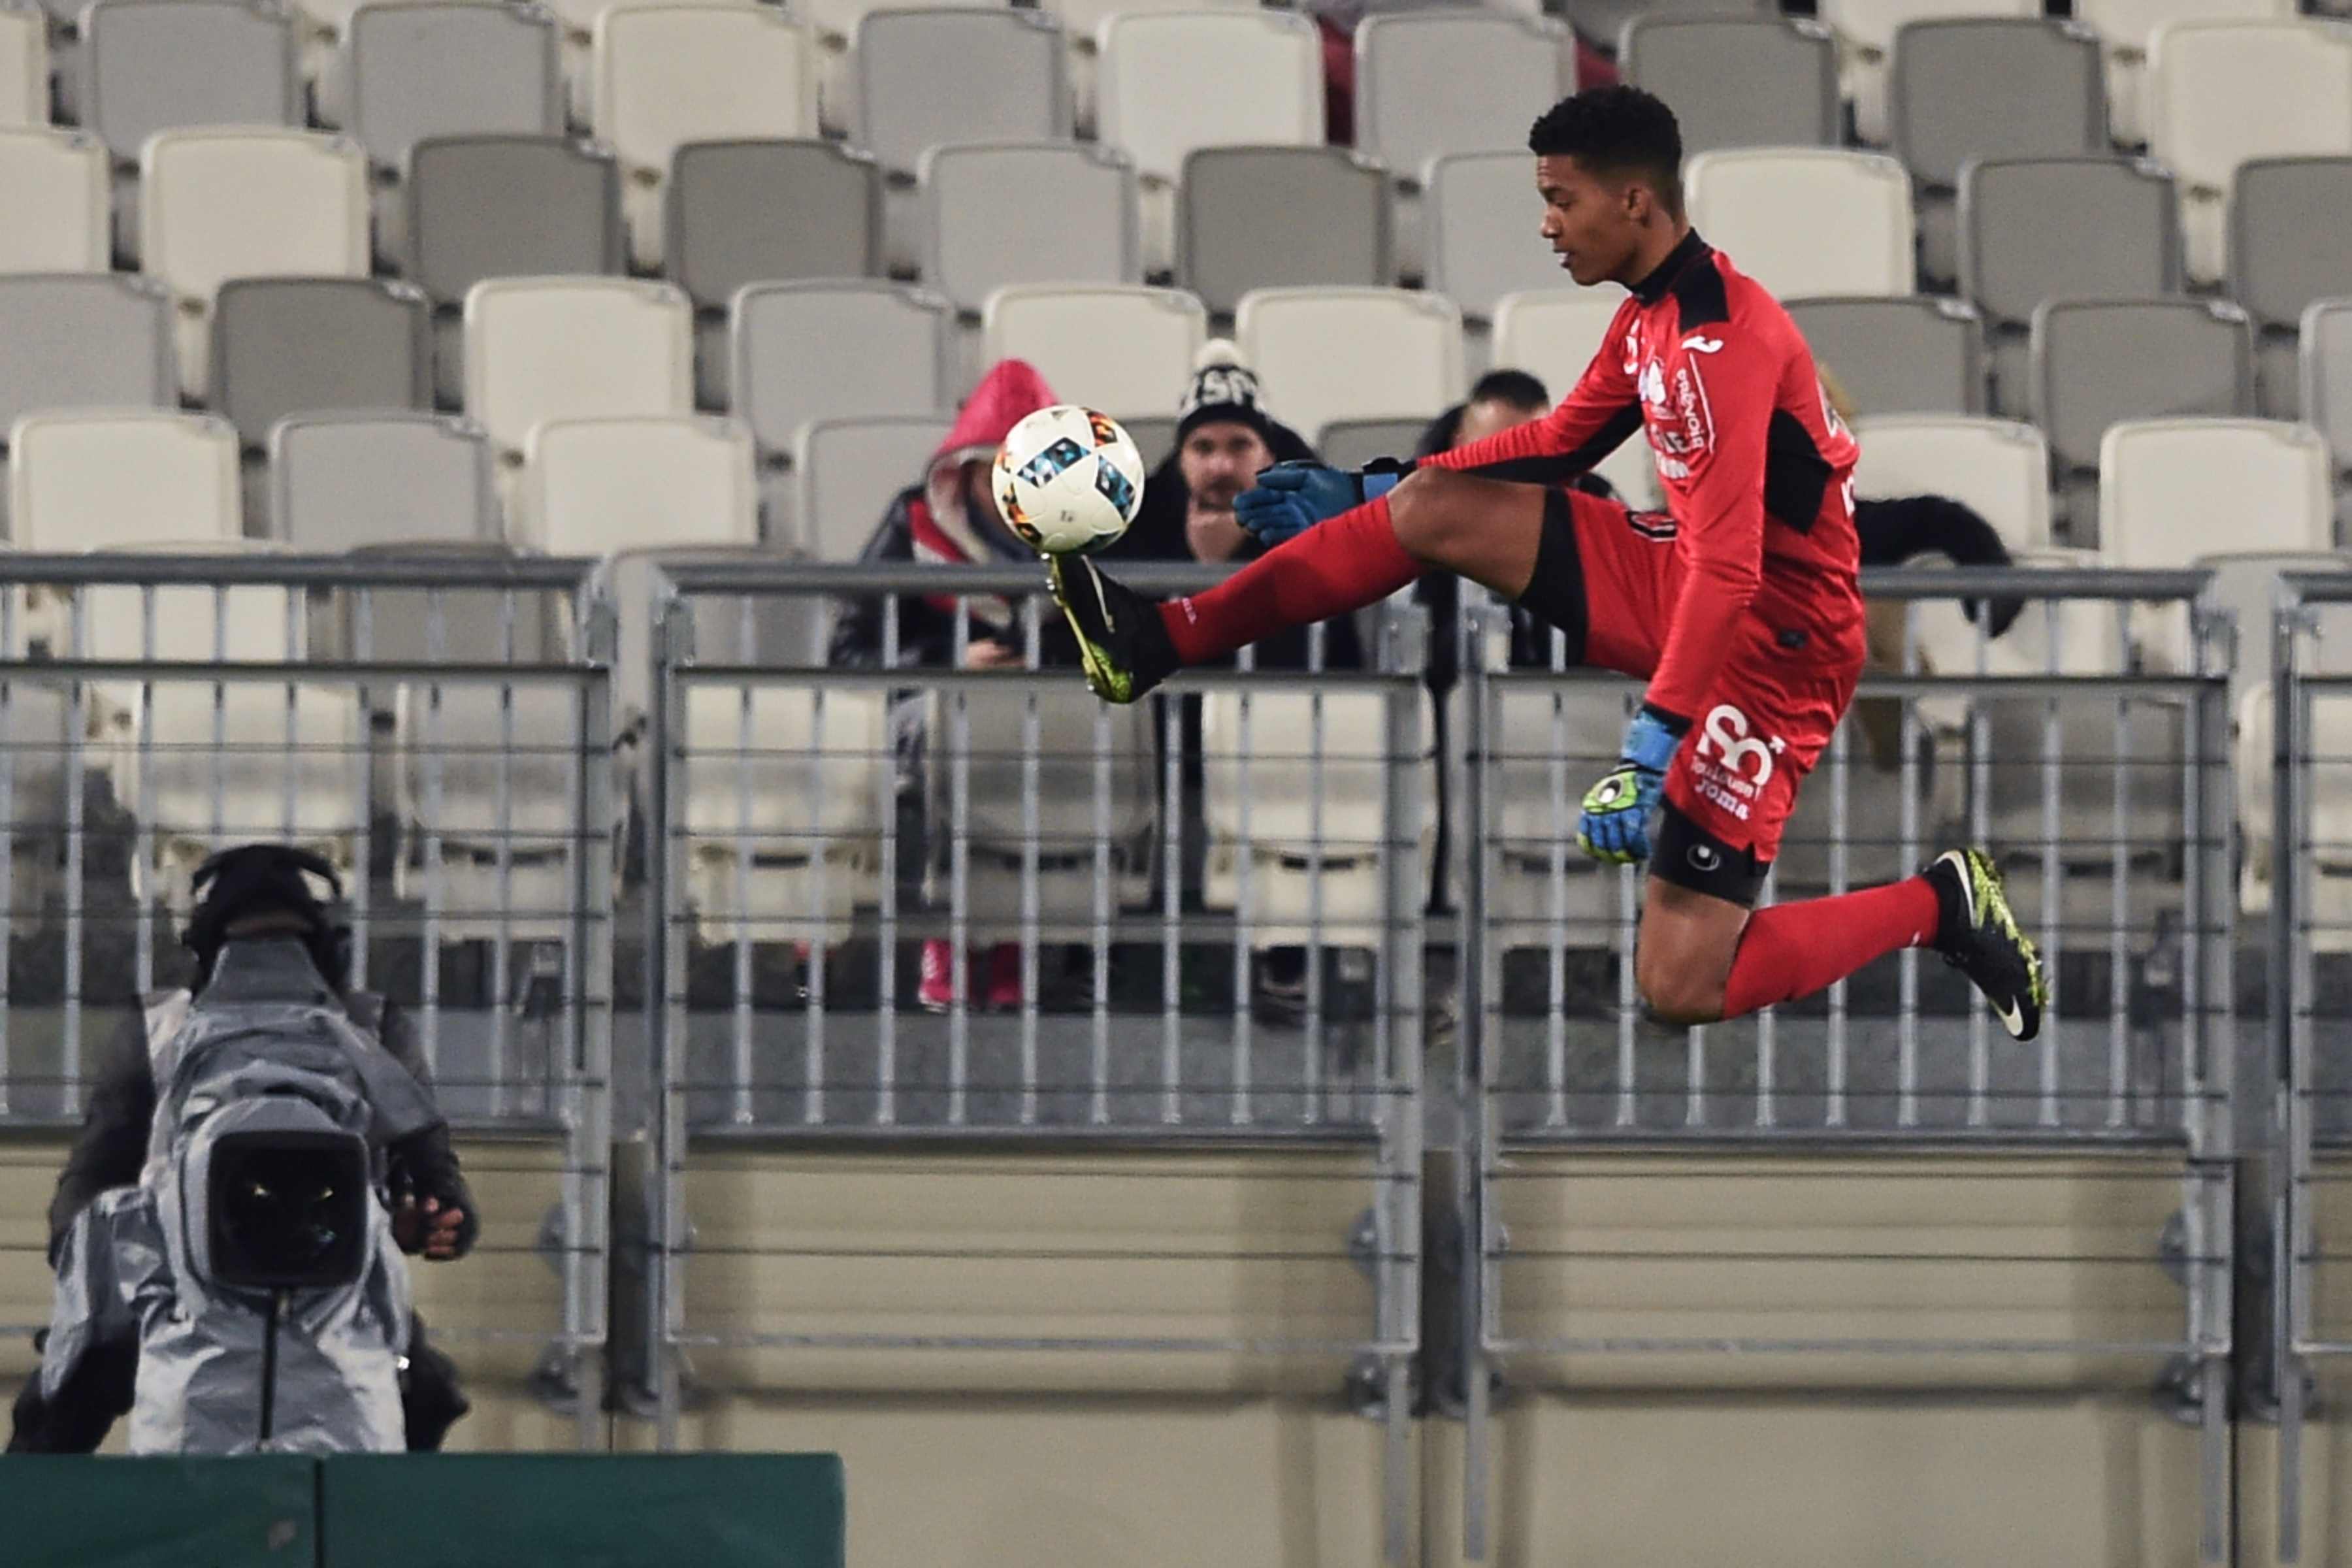 Tipped for the clouds, Lafont is flying high. (Picture Courtesy - AFP/Getty Images)